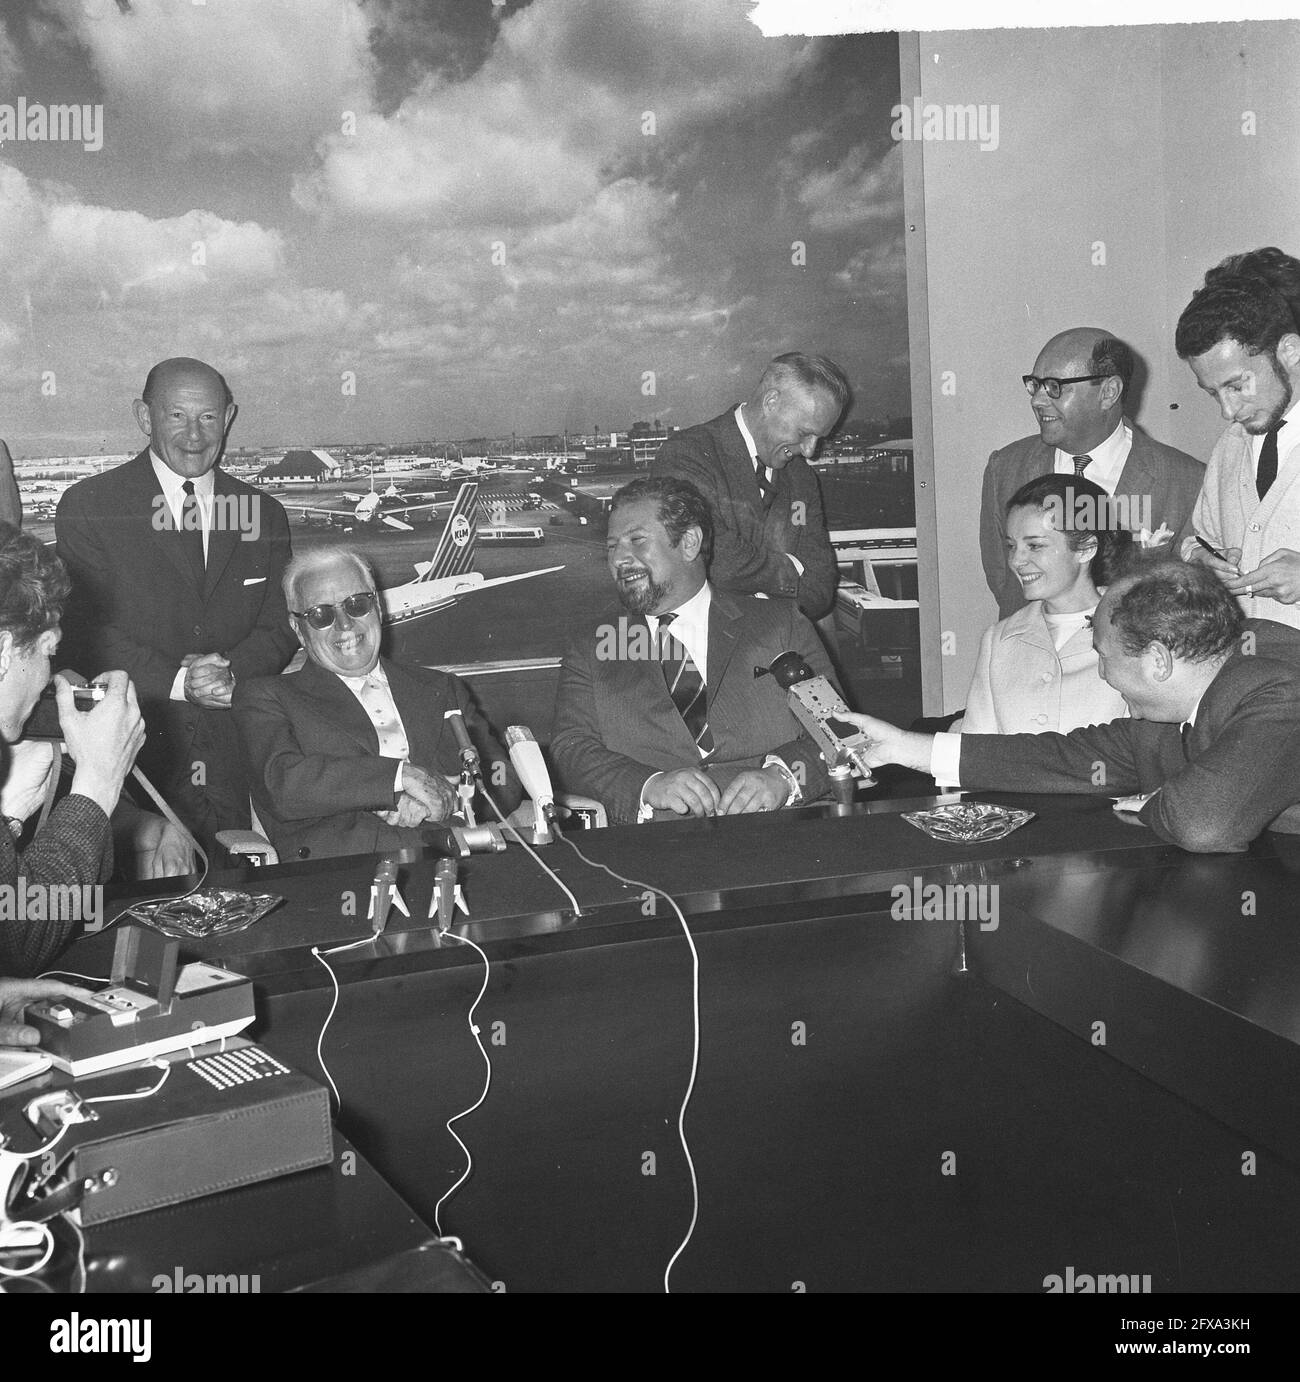 Chaplin and Peter Ustinov (seated right) during press conference, June 23, 1965, actors, press conferences, The Netherlands, 20th century press agency photo, news to remember, documentary, historic photography 1945-1990, visual stories, human history of the Twentieth Century, capturing moments in time Stock Photo